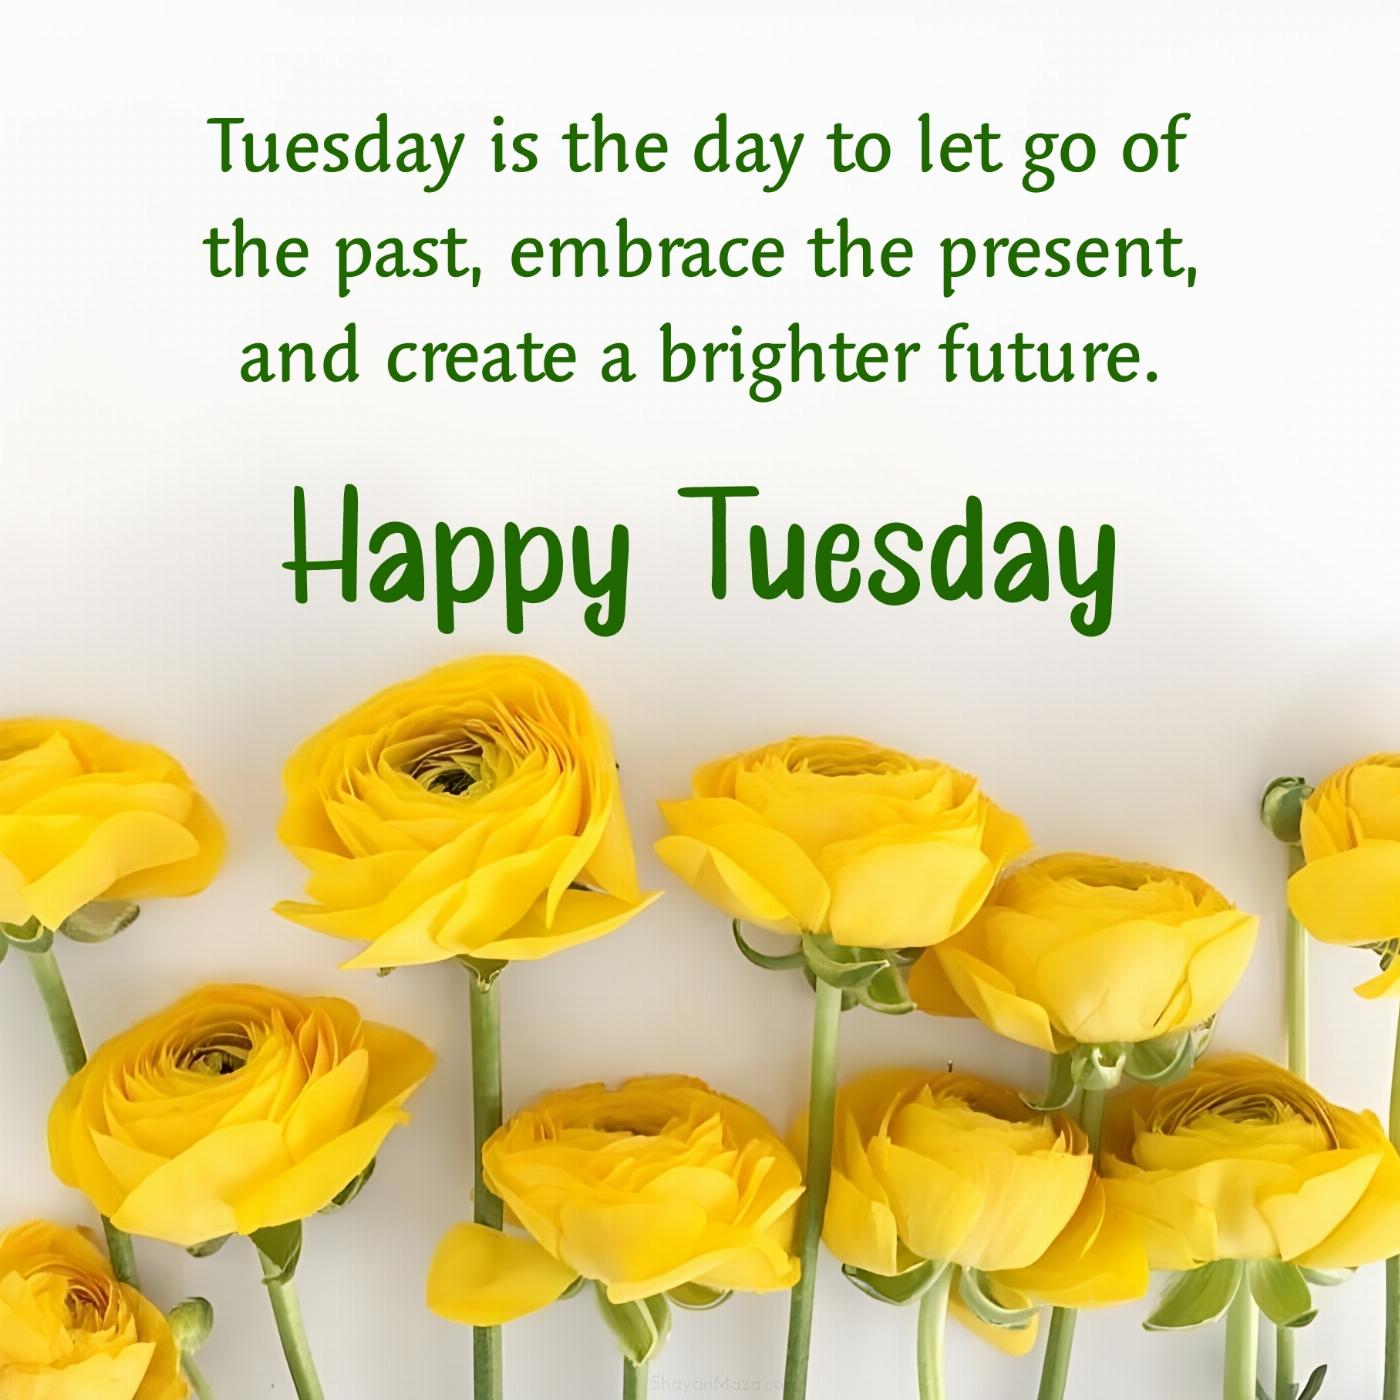 Tuesday is the day to let go of the past embrace the present